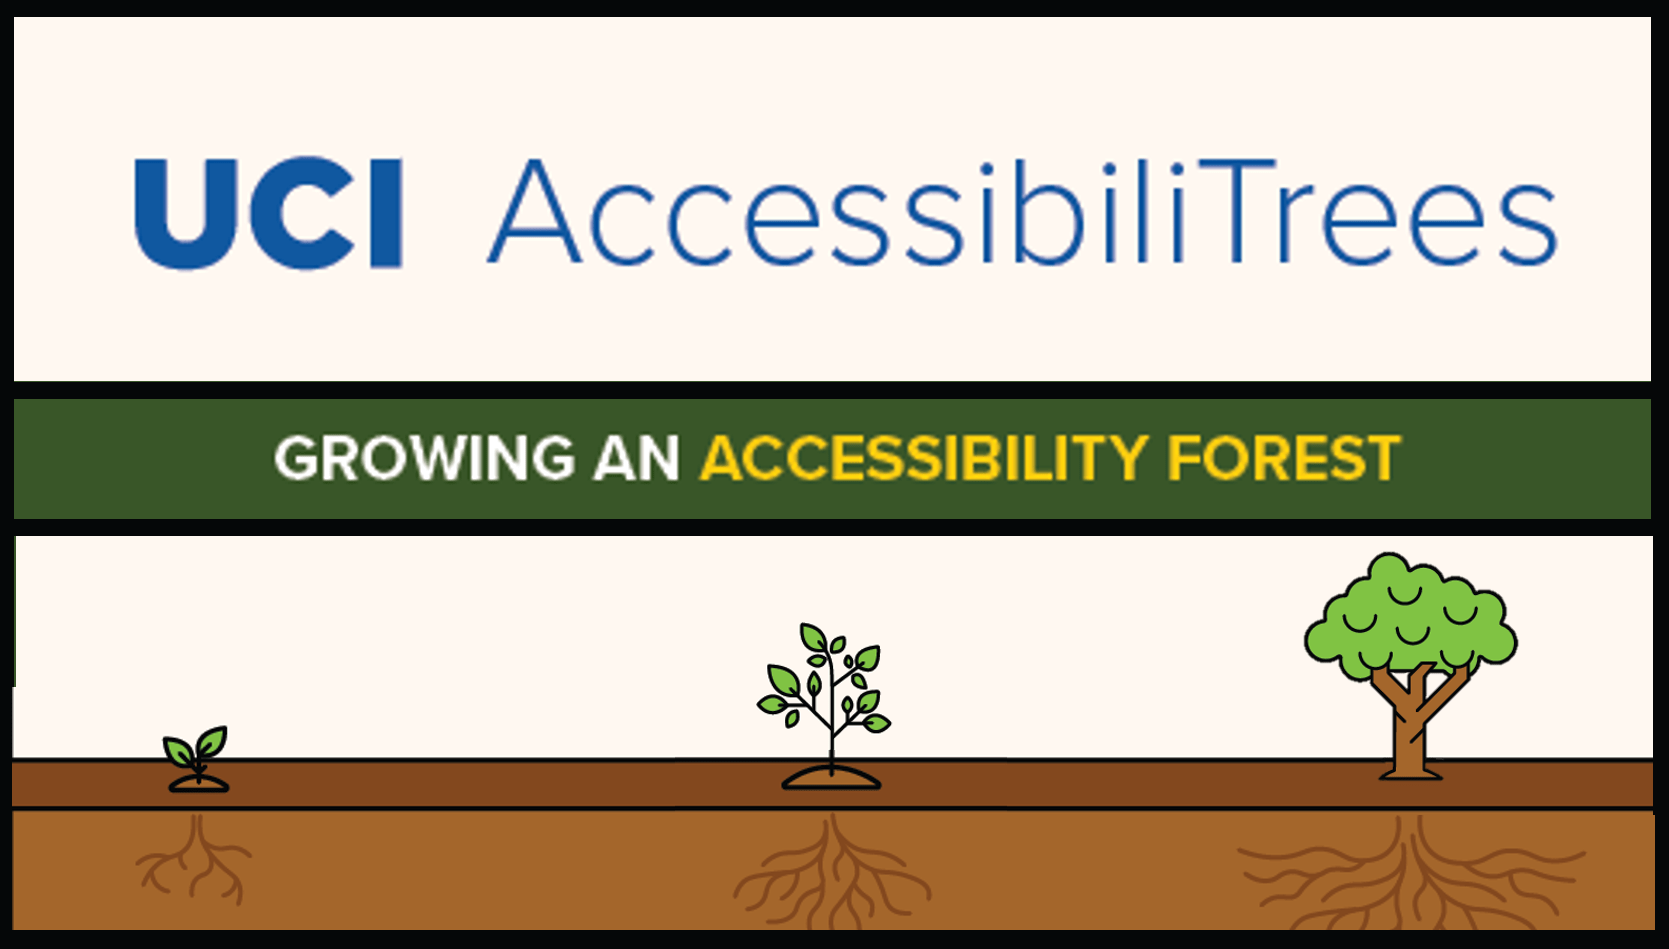 Quick Tips for Creating Accessible Documents